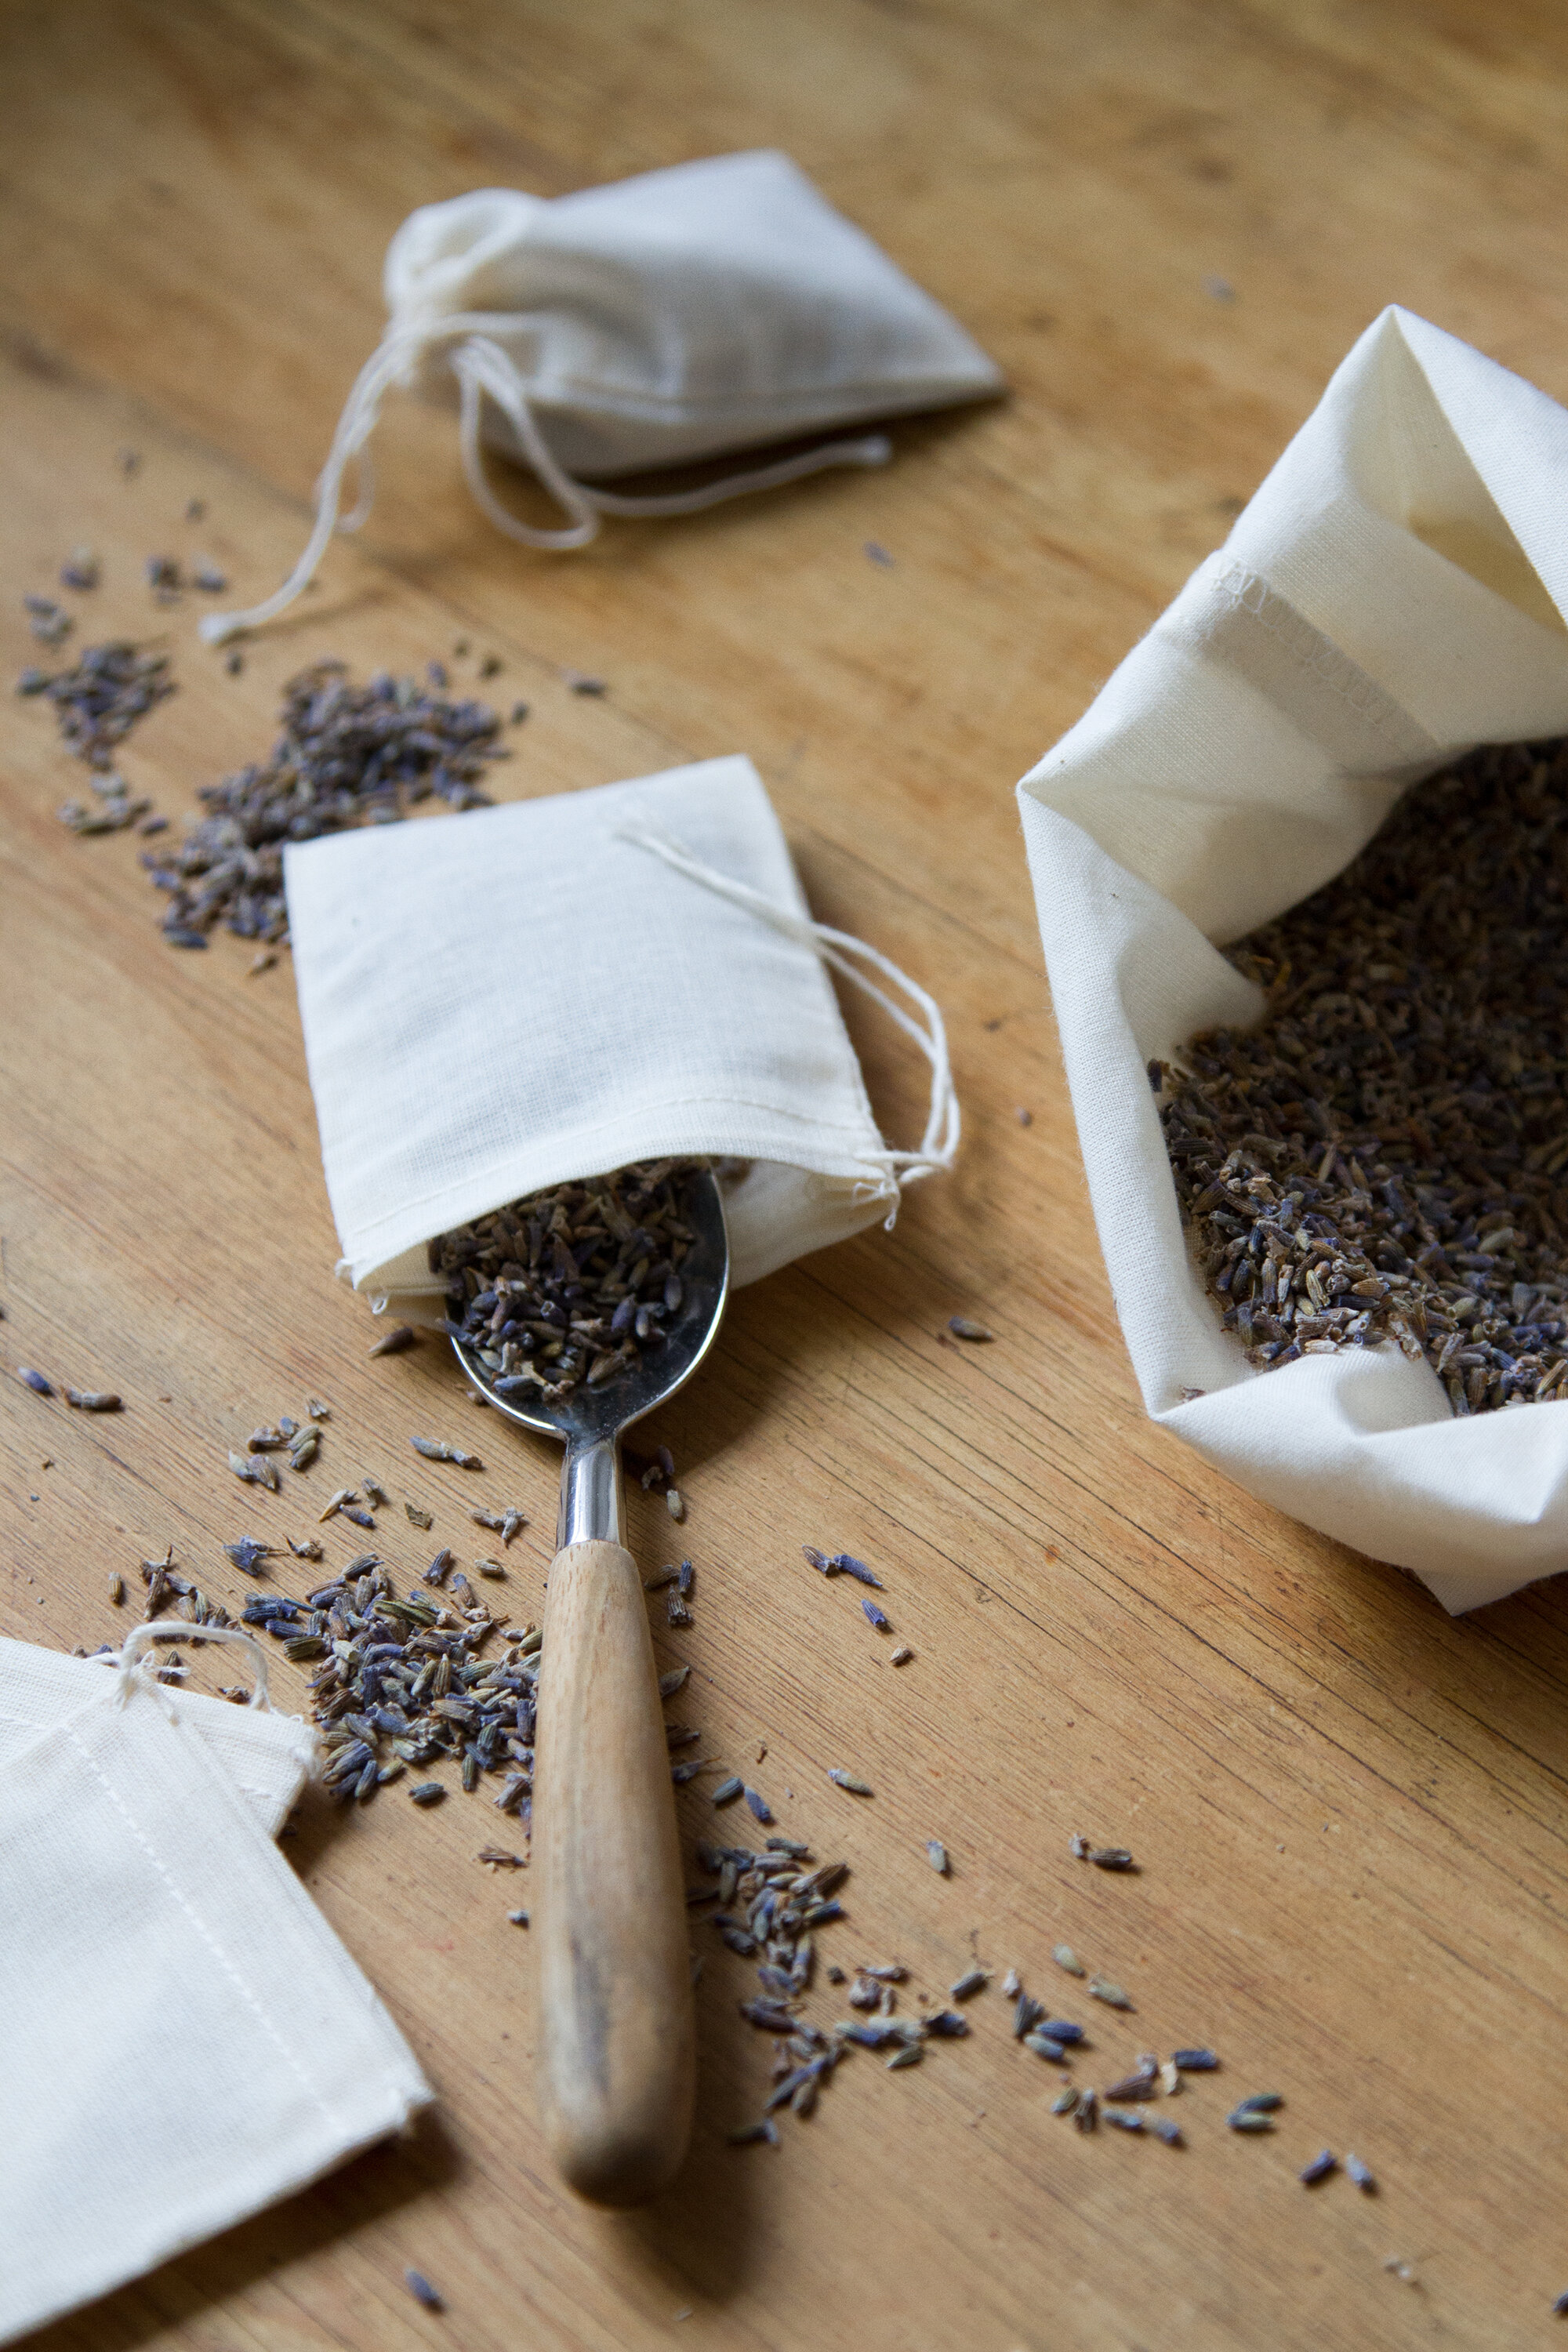 spring cleaning, two ways | reading my tea leaves